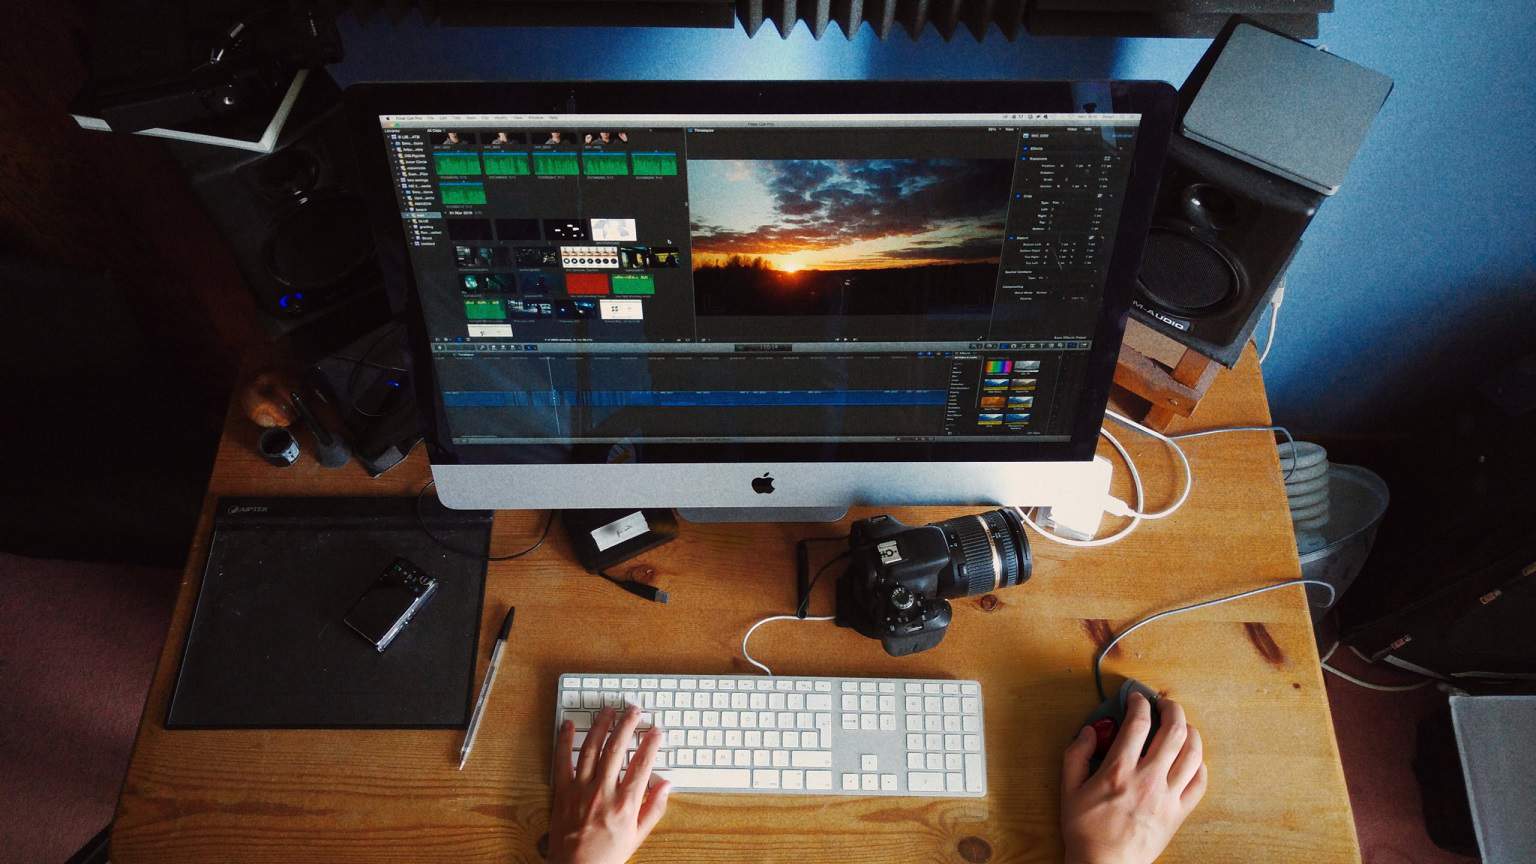 5 Things to Consider When Looking for a Video Editing Software